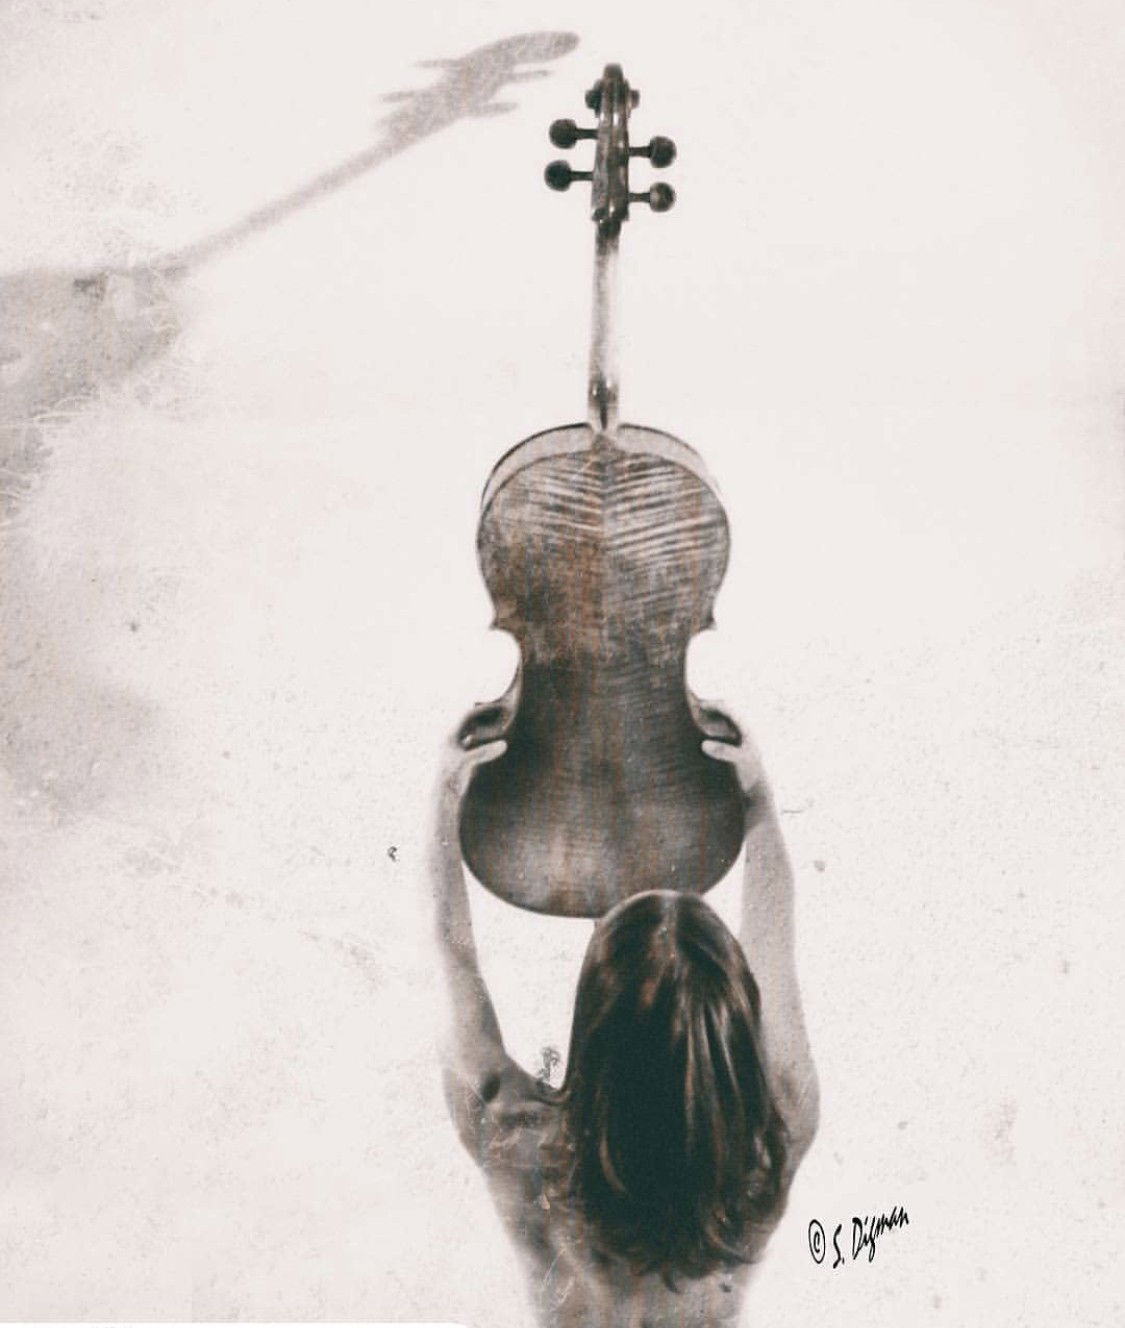 Watch the Photo by PolyAnnieStudios with the username @PolyAnnieStudios, who is a star user, posted on September 29, 2019. The post is about the topic erotic art. and the text says 'The cello is my favorite instrument! the one that speaks to my soul the most. 
photo from earlier years! 
https://www.patreon.com/polyannie'